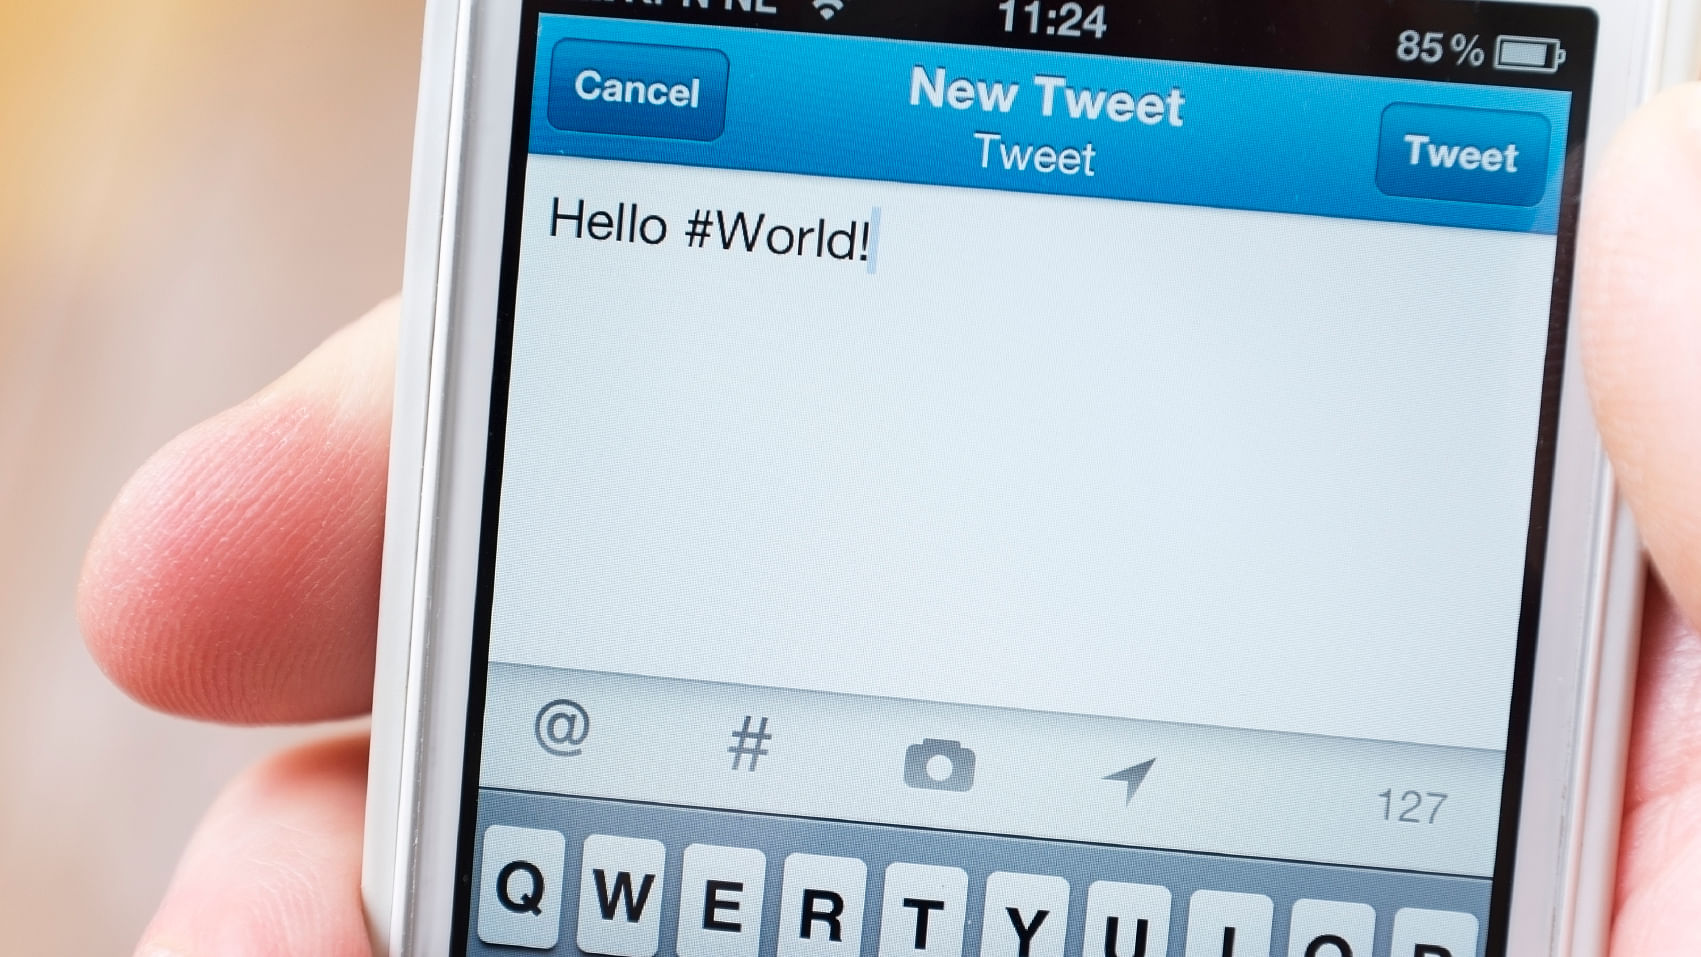 Welcome to the 140-character world on Twitter. (Photo: iStockphoto)